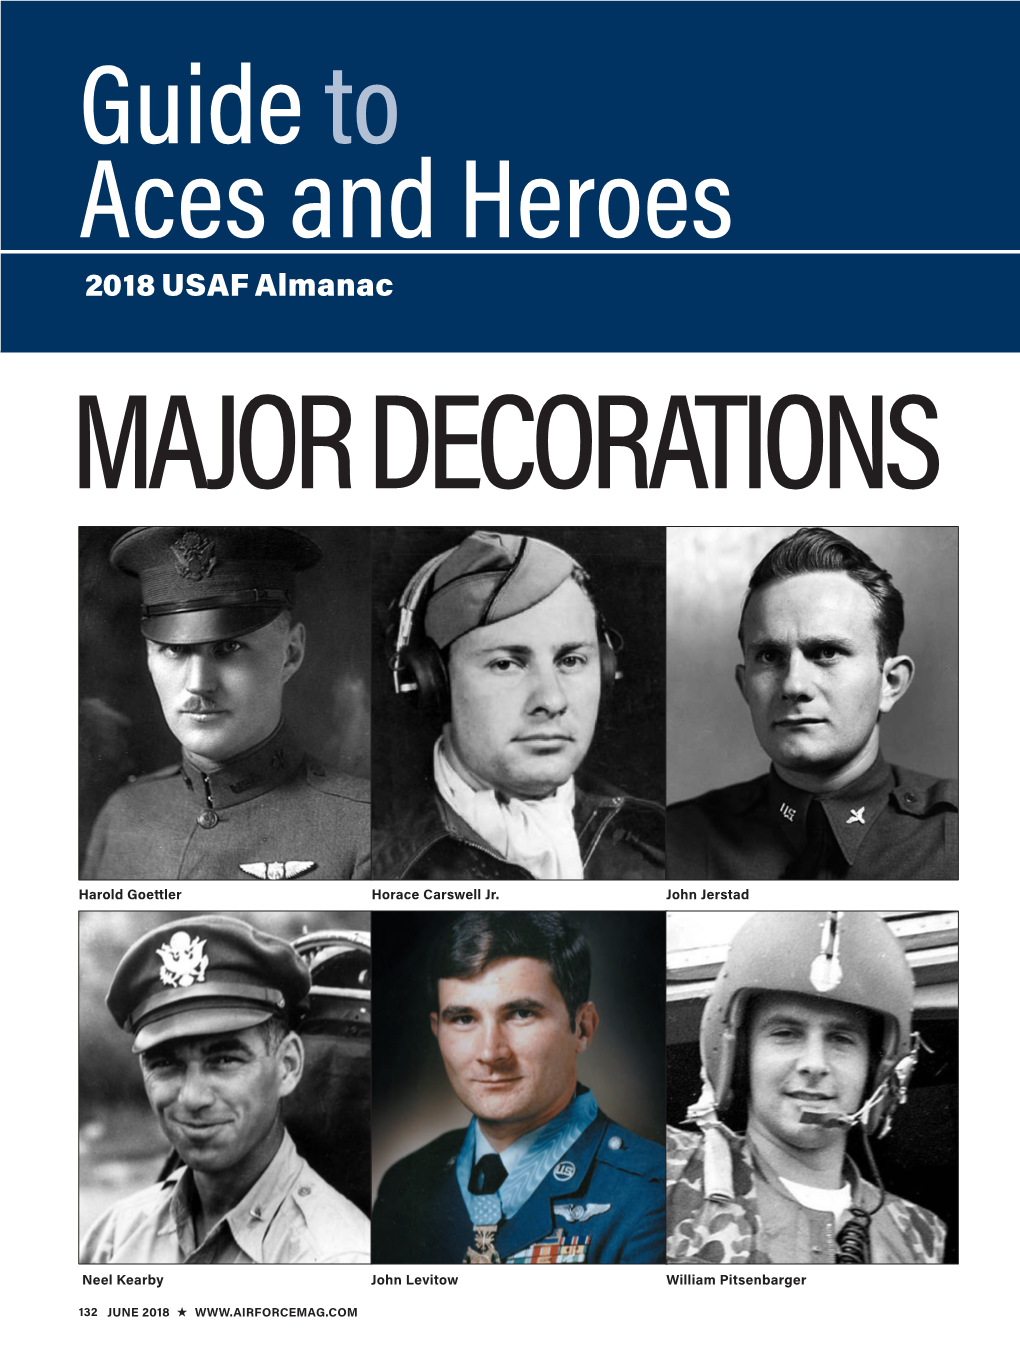 Guideto Aces and Heroes